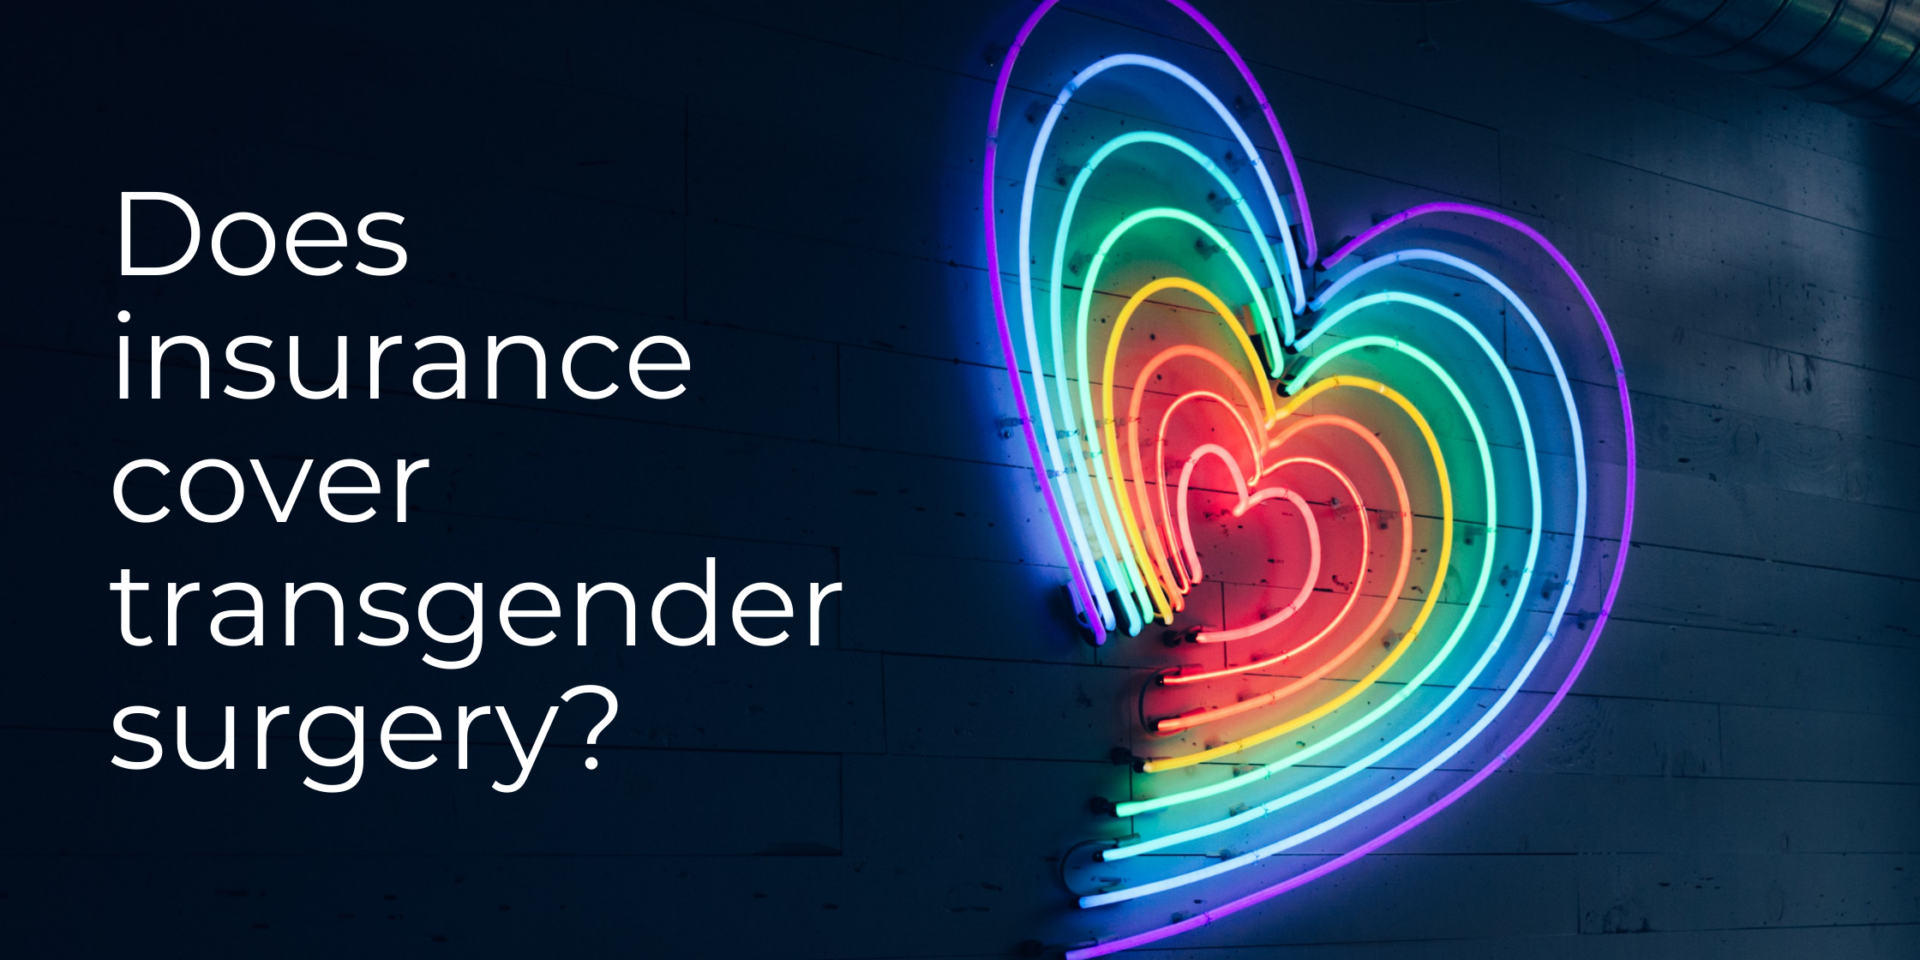 Does insurance cover transgender surgery?